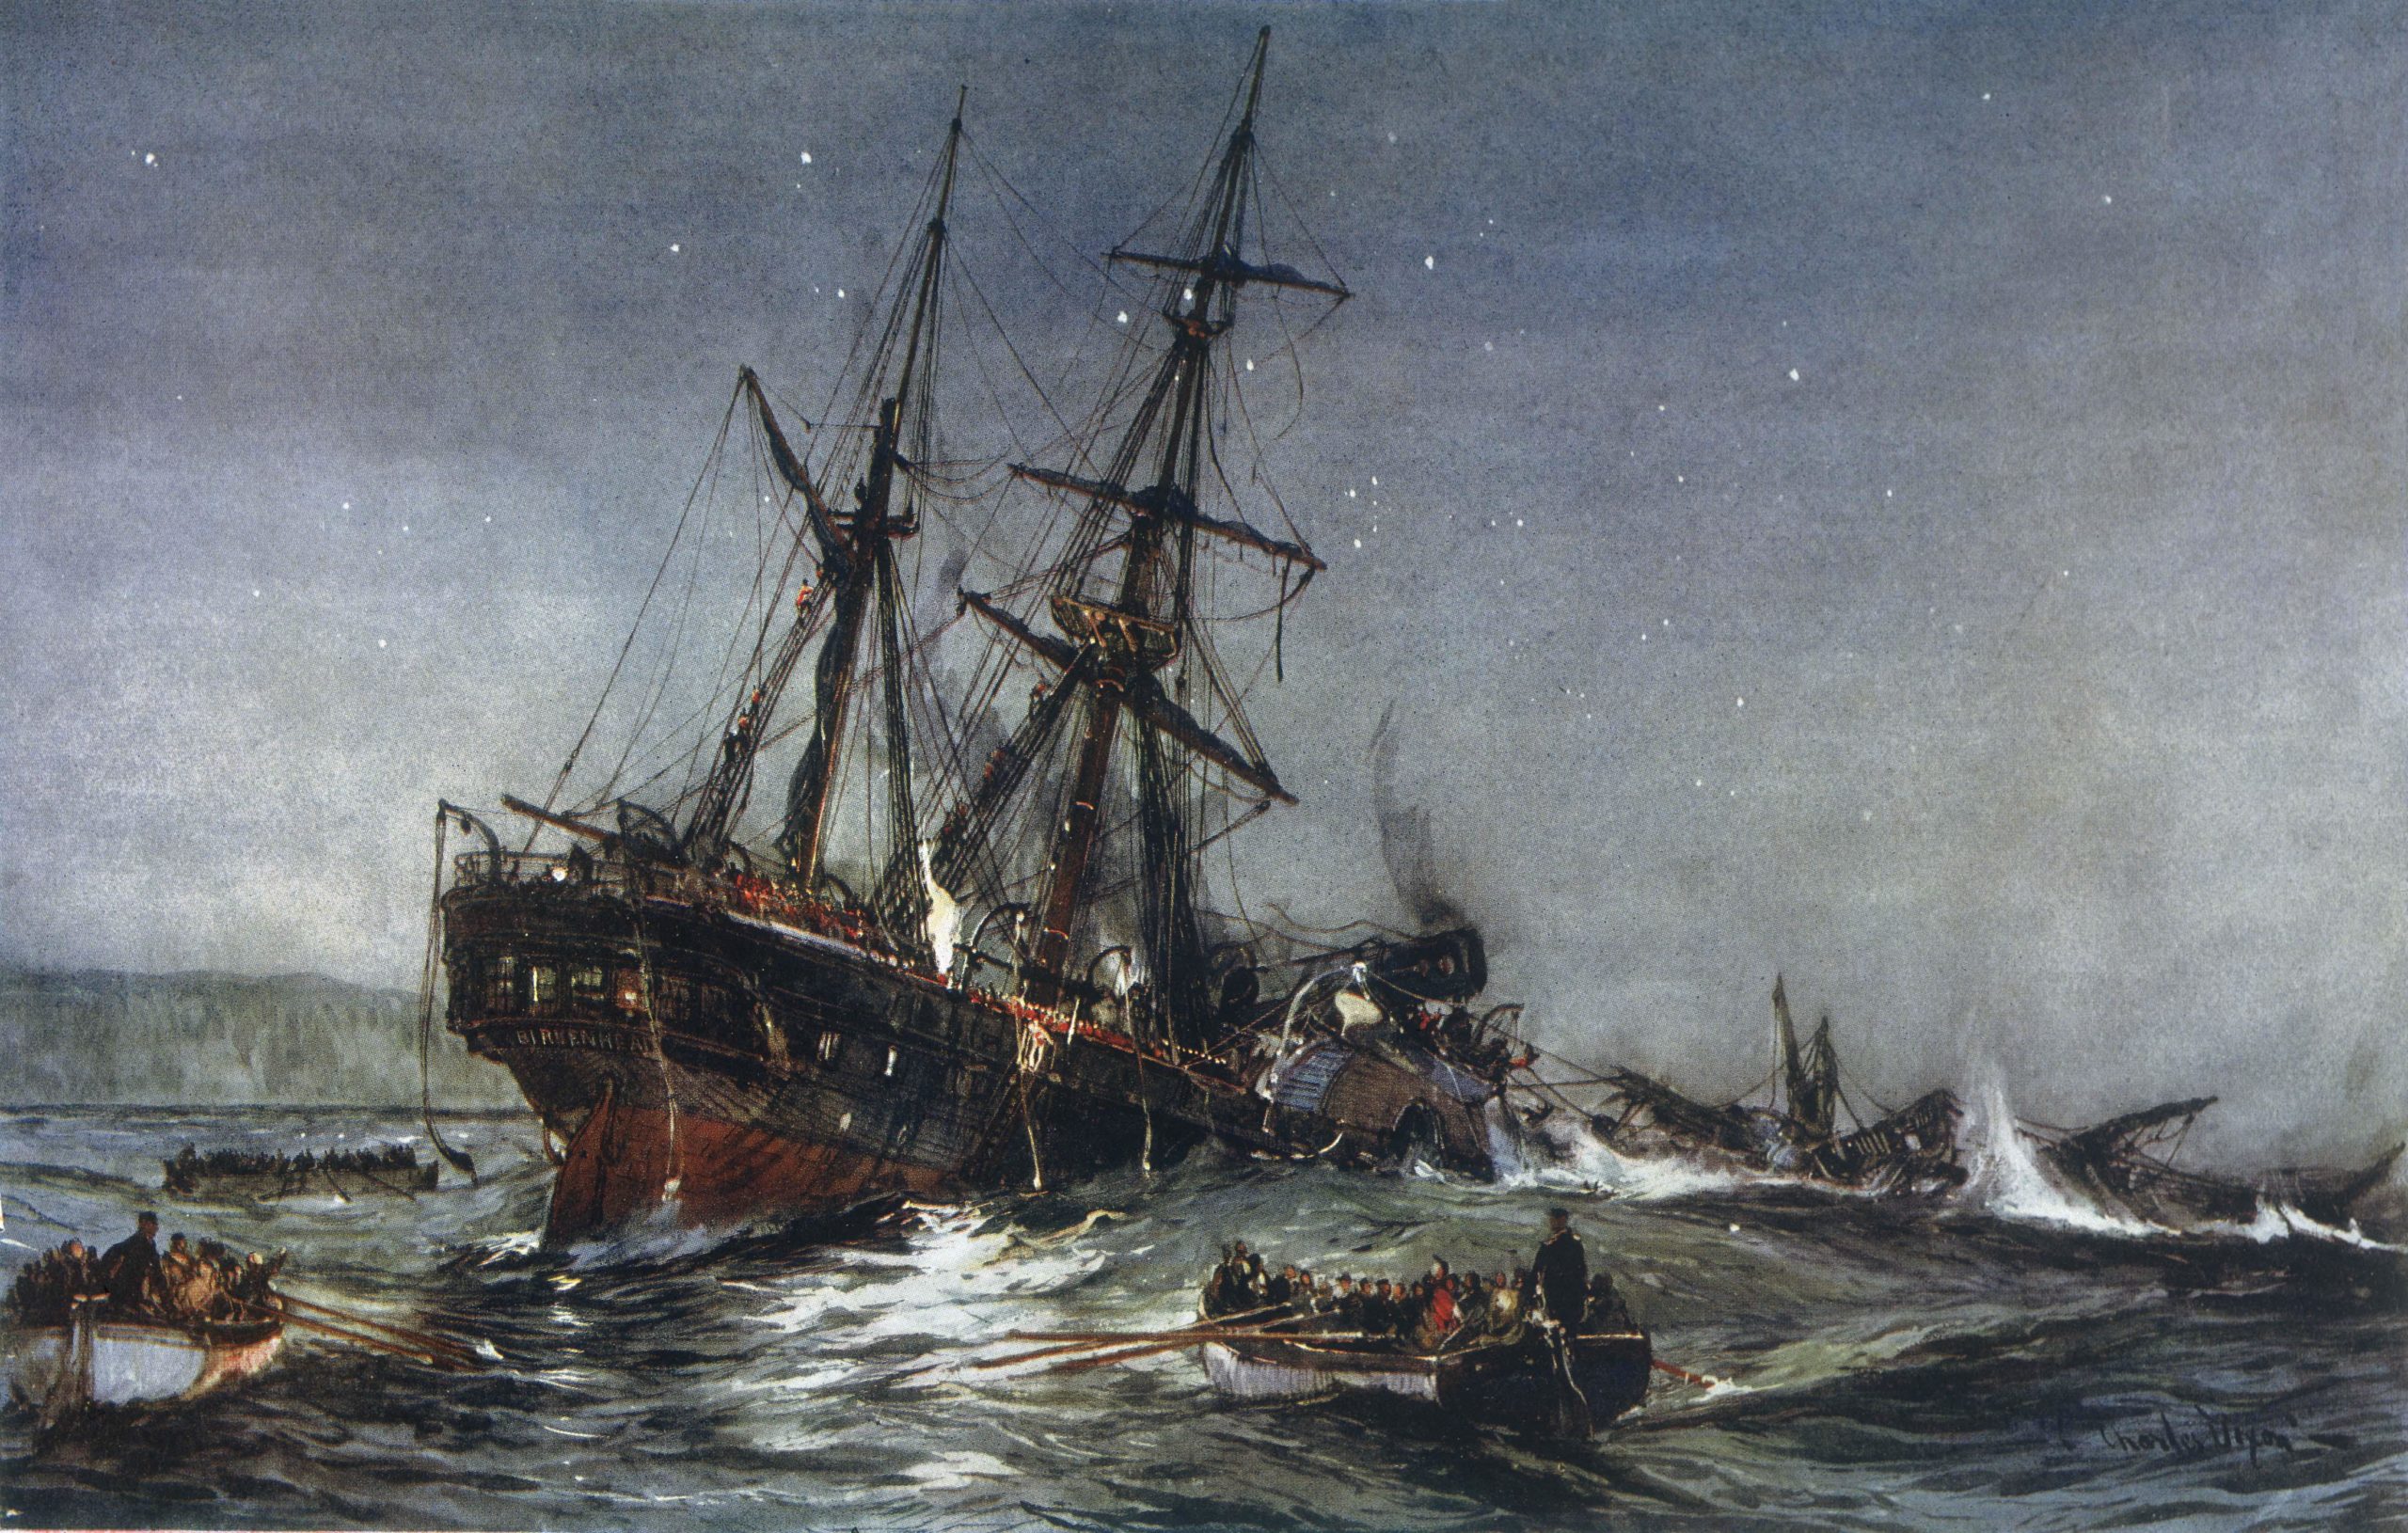 The sinking of the HMS Birkenhead, painted by Charles Dixon